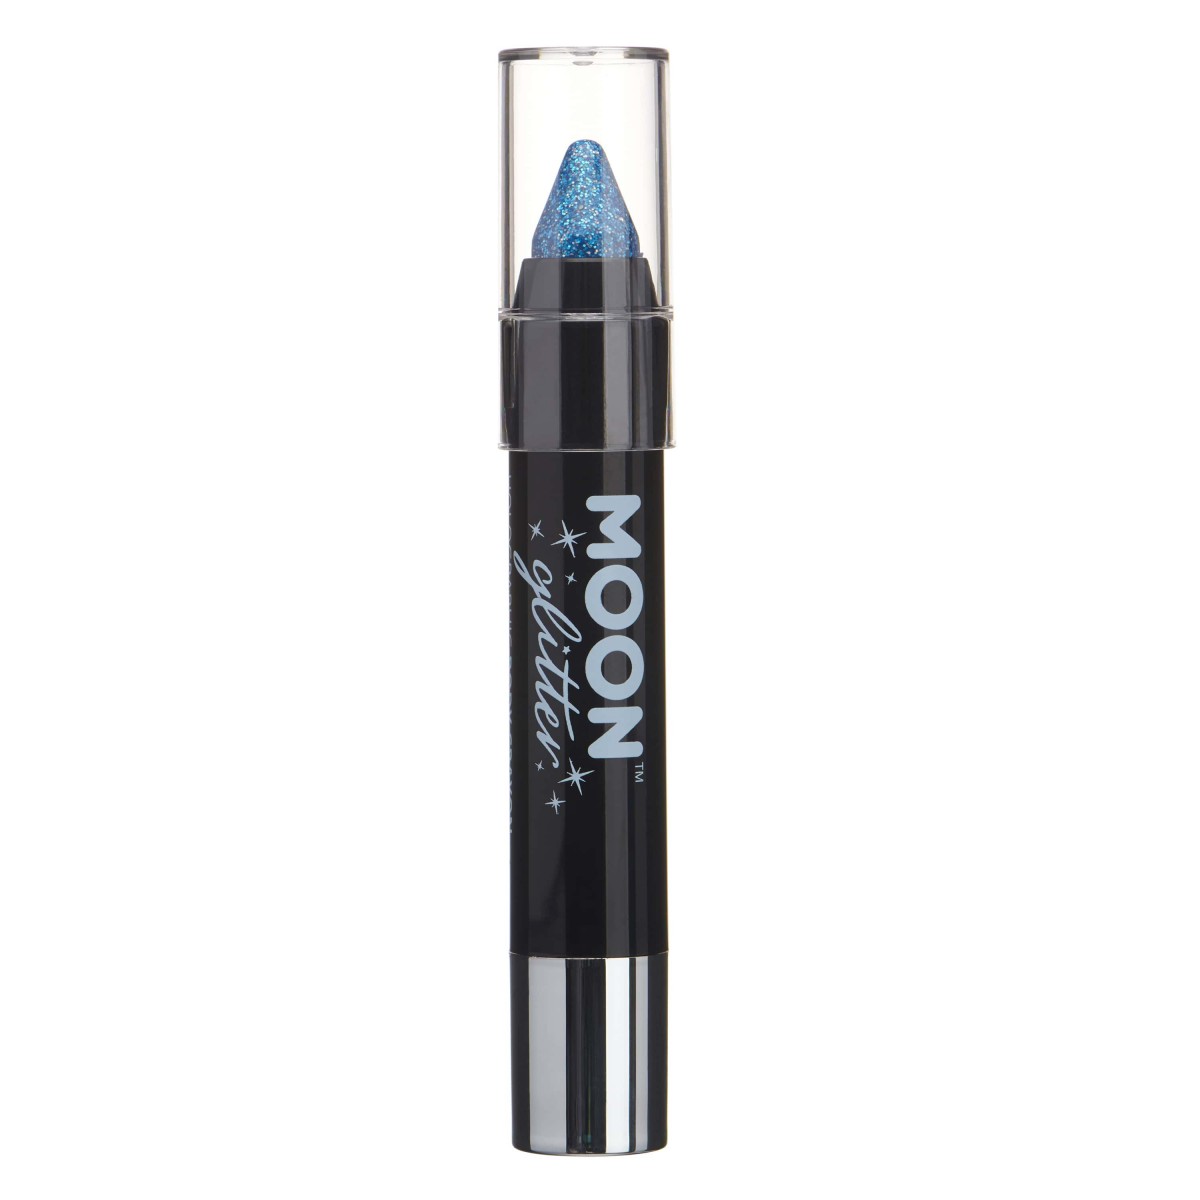 MOON CREATIONS G2 HOLOGRAPHIC GLITTER FACE & BODY CRAYON BLUE 3.2g